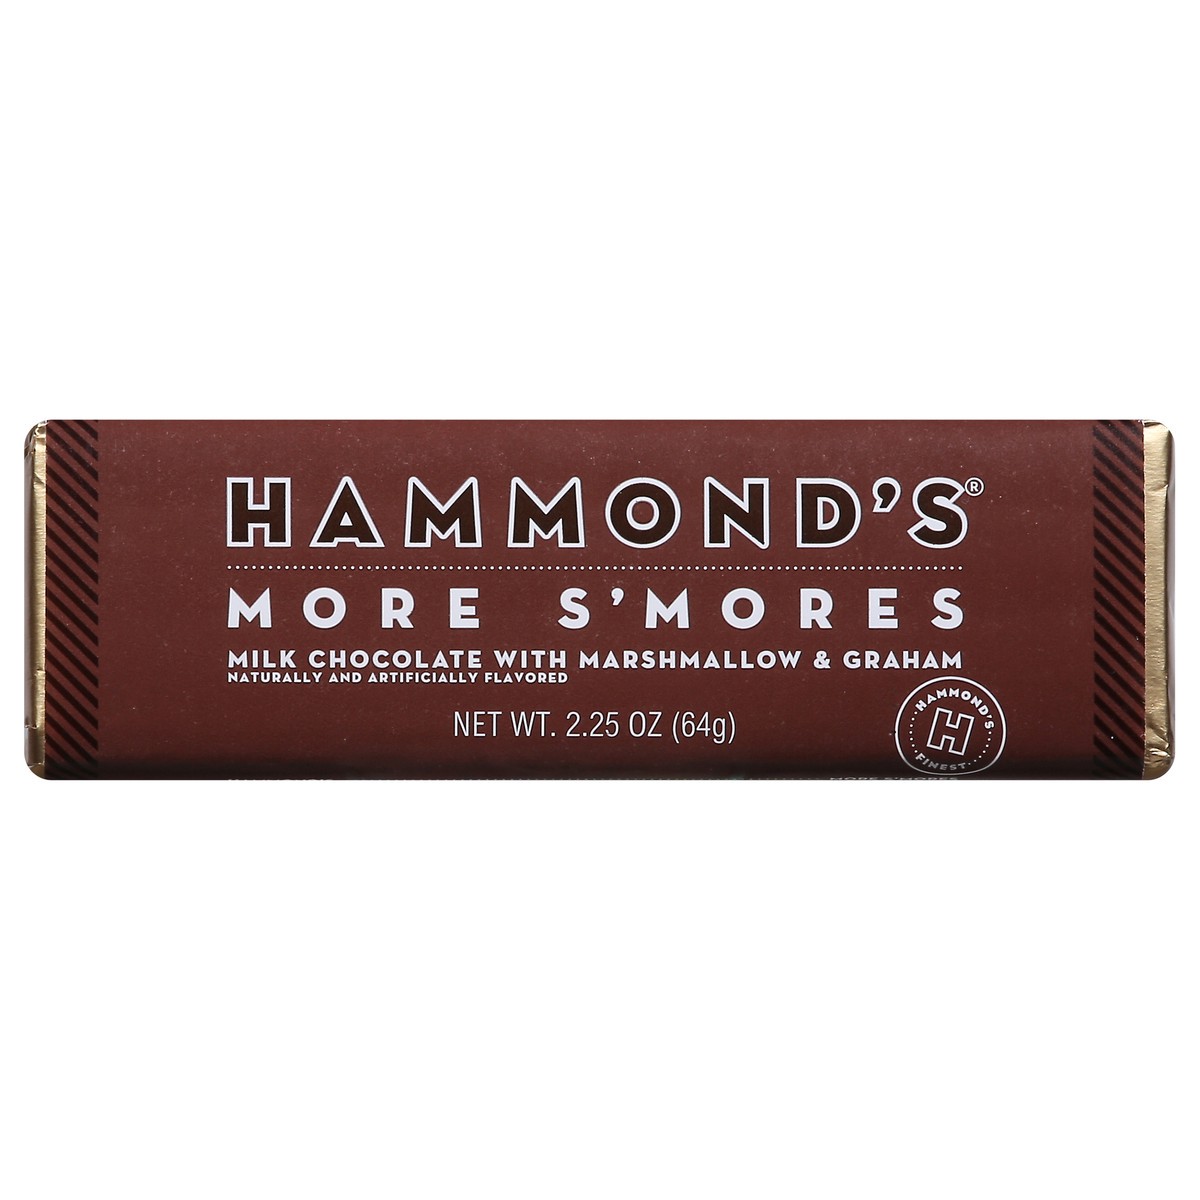 slide 8 of 14, Hammond's More S'mores Milk Chocolate with Marshmallow & Graham 2.25 oz, 2.25 oz